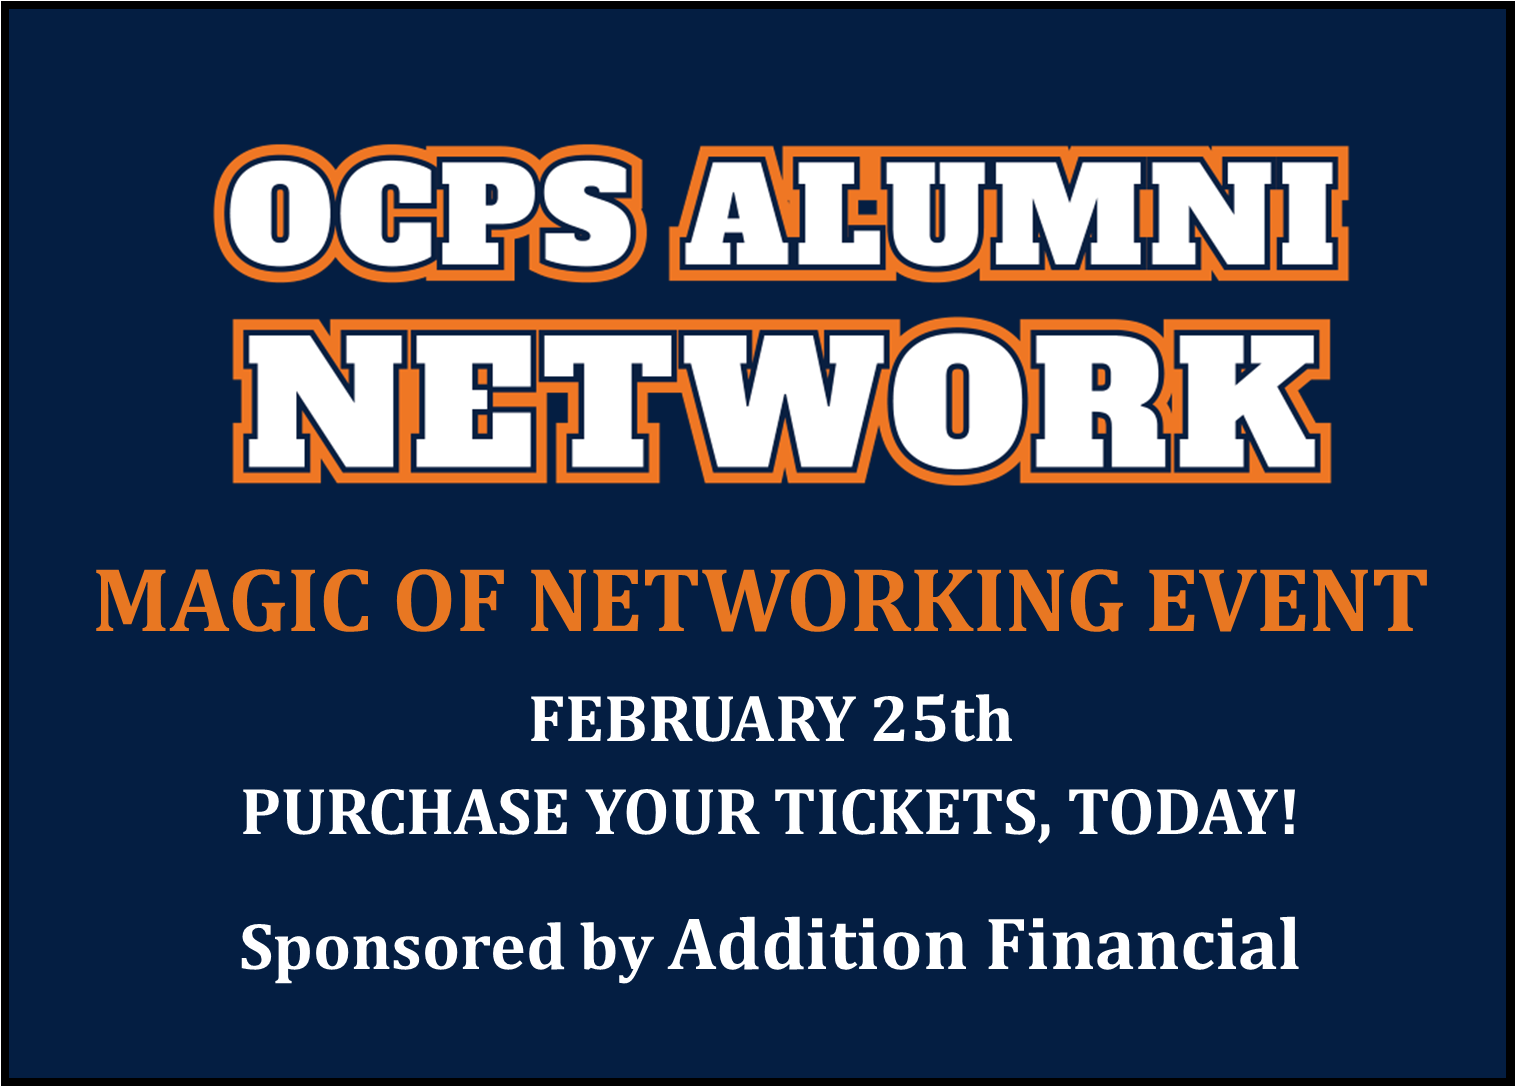 OCPS ALUMNI NETWORK - MAGIC OF NETWORKING, February 25, purchase your tickets, Today!